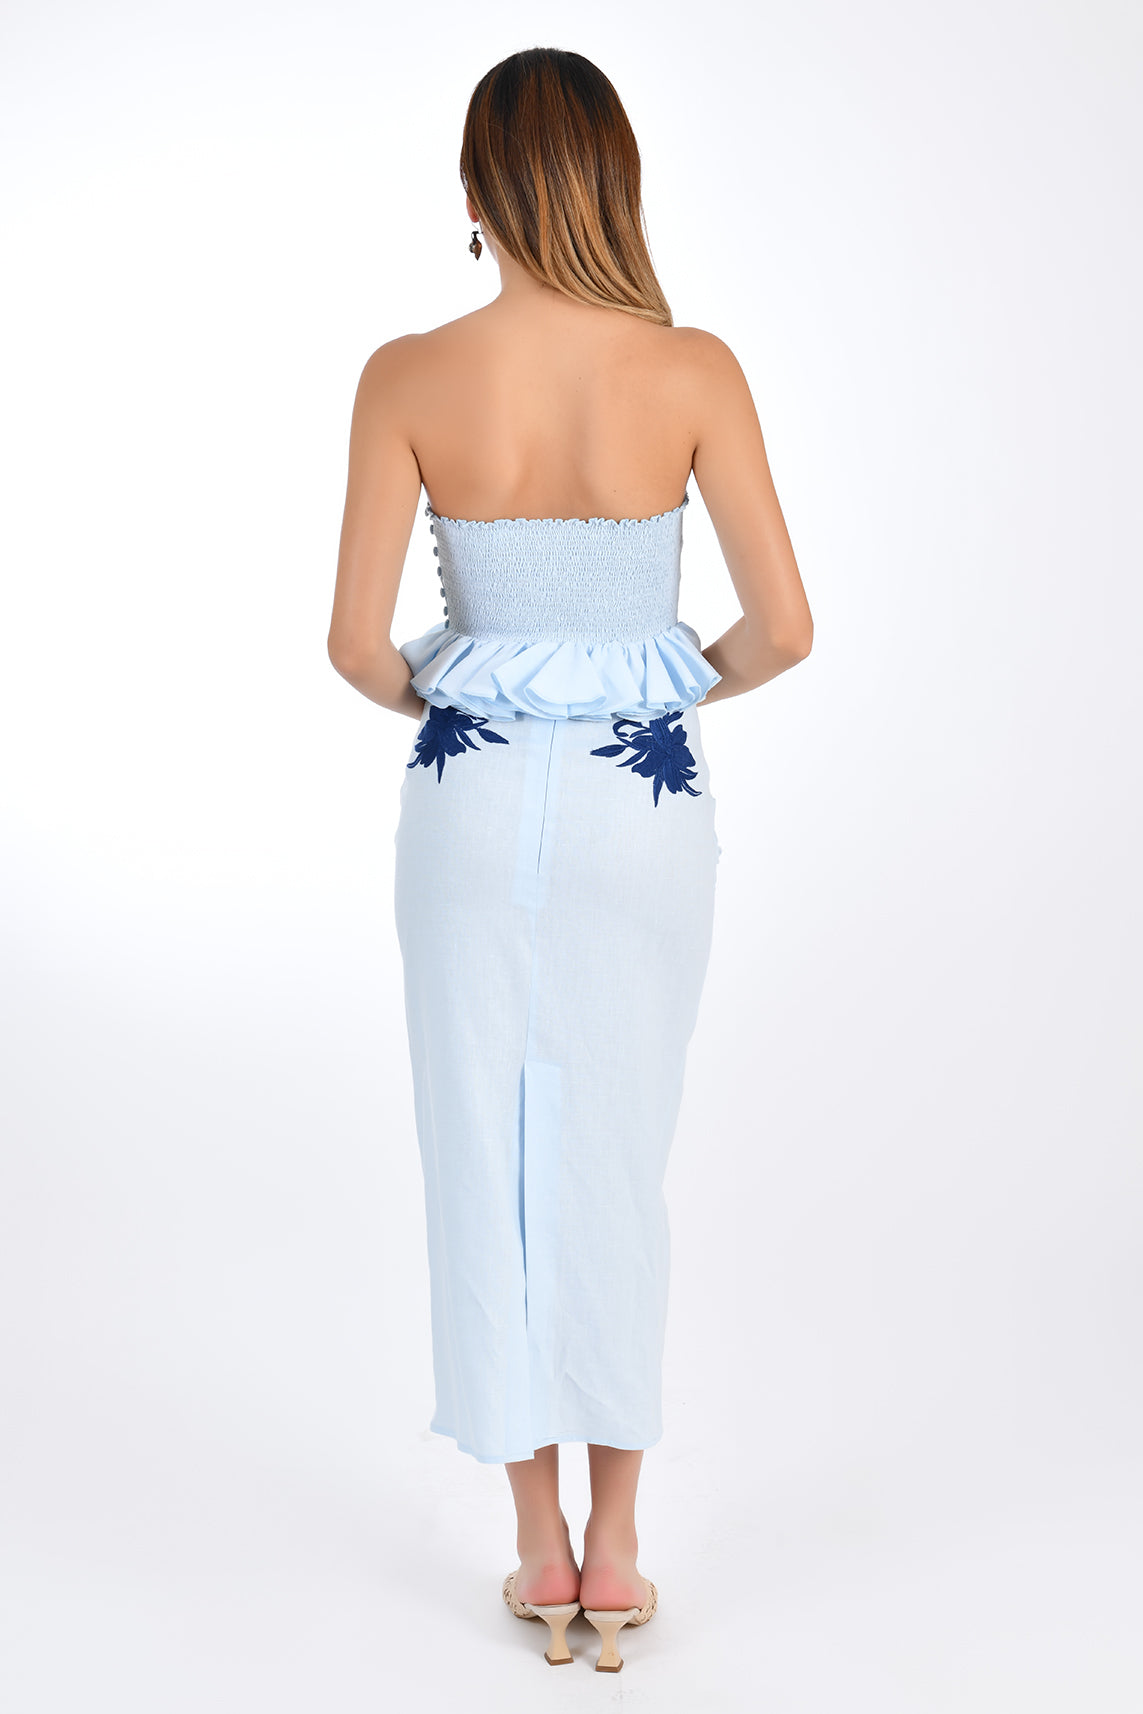 Fanm Mon Arina 2 Piece Linen Skirt Set. Back view of strapless ruffle peplum top and straight midi length skirt with back embroidery detail and back slit and zipper closure.